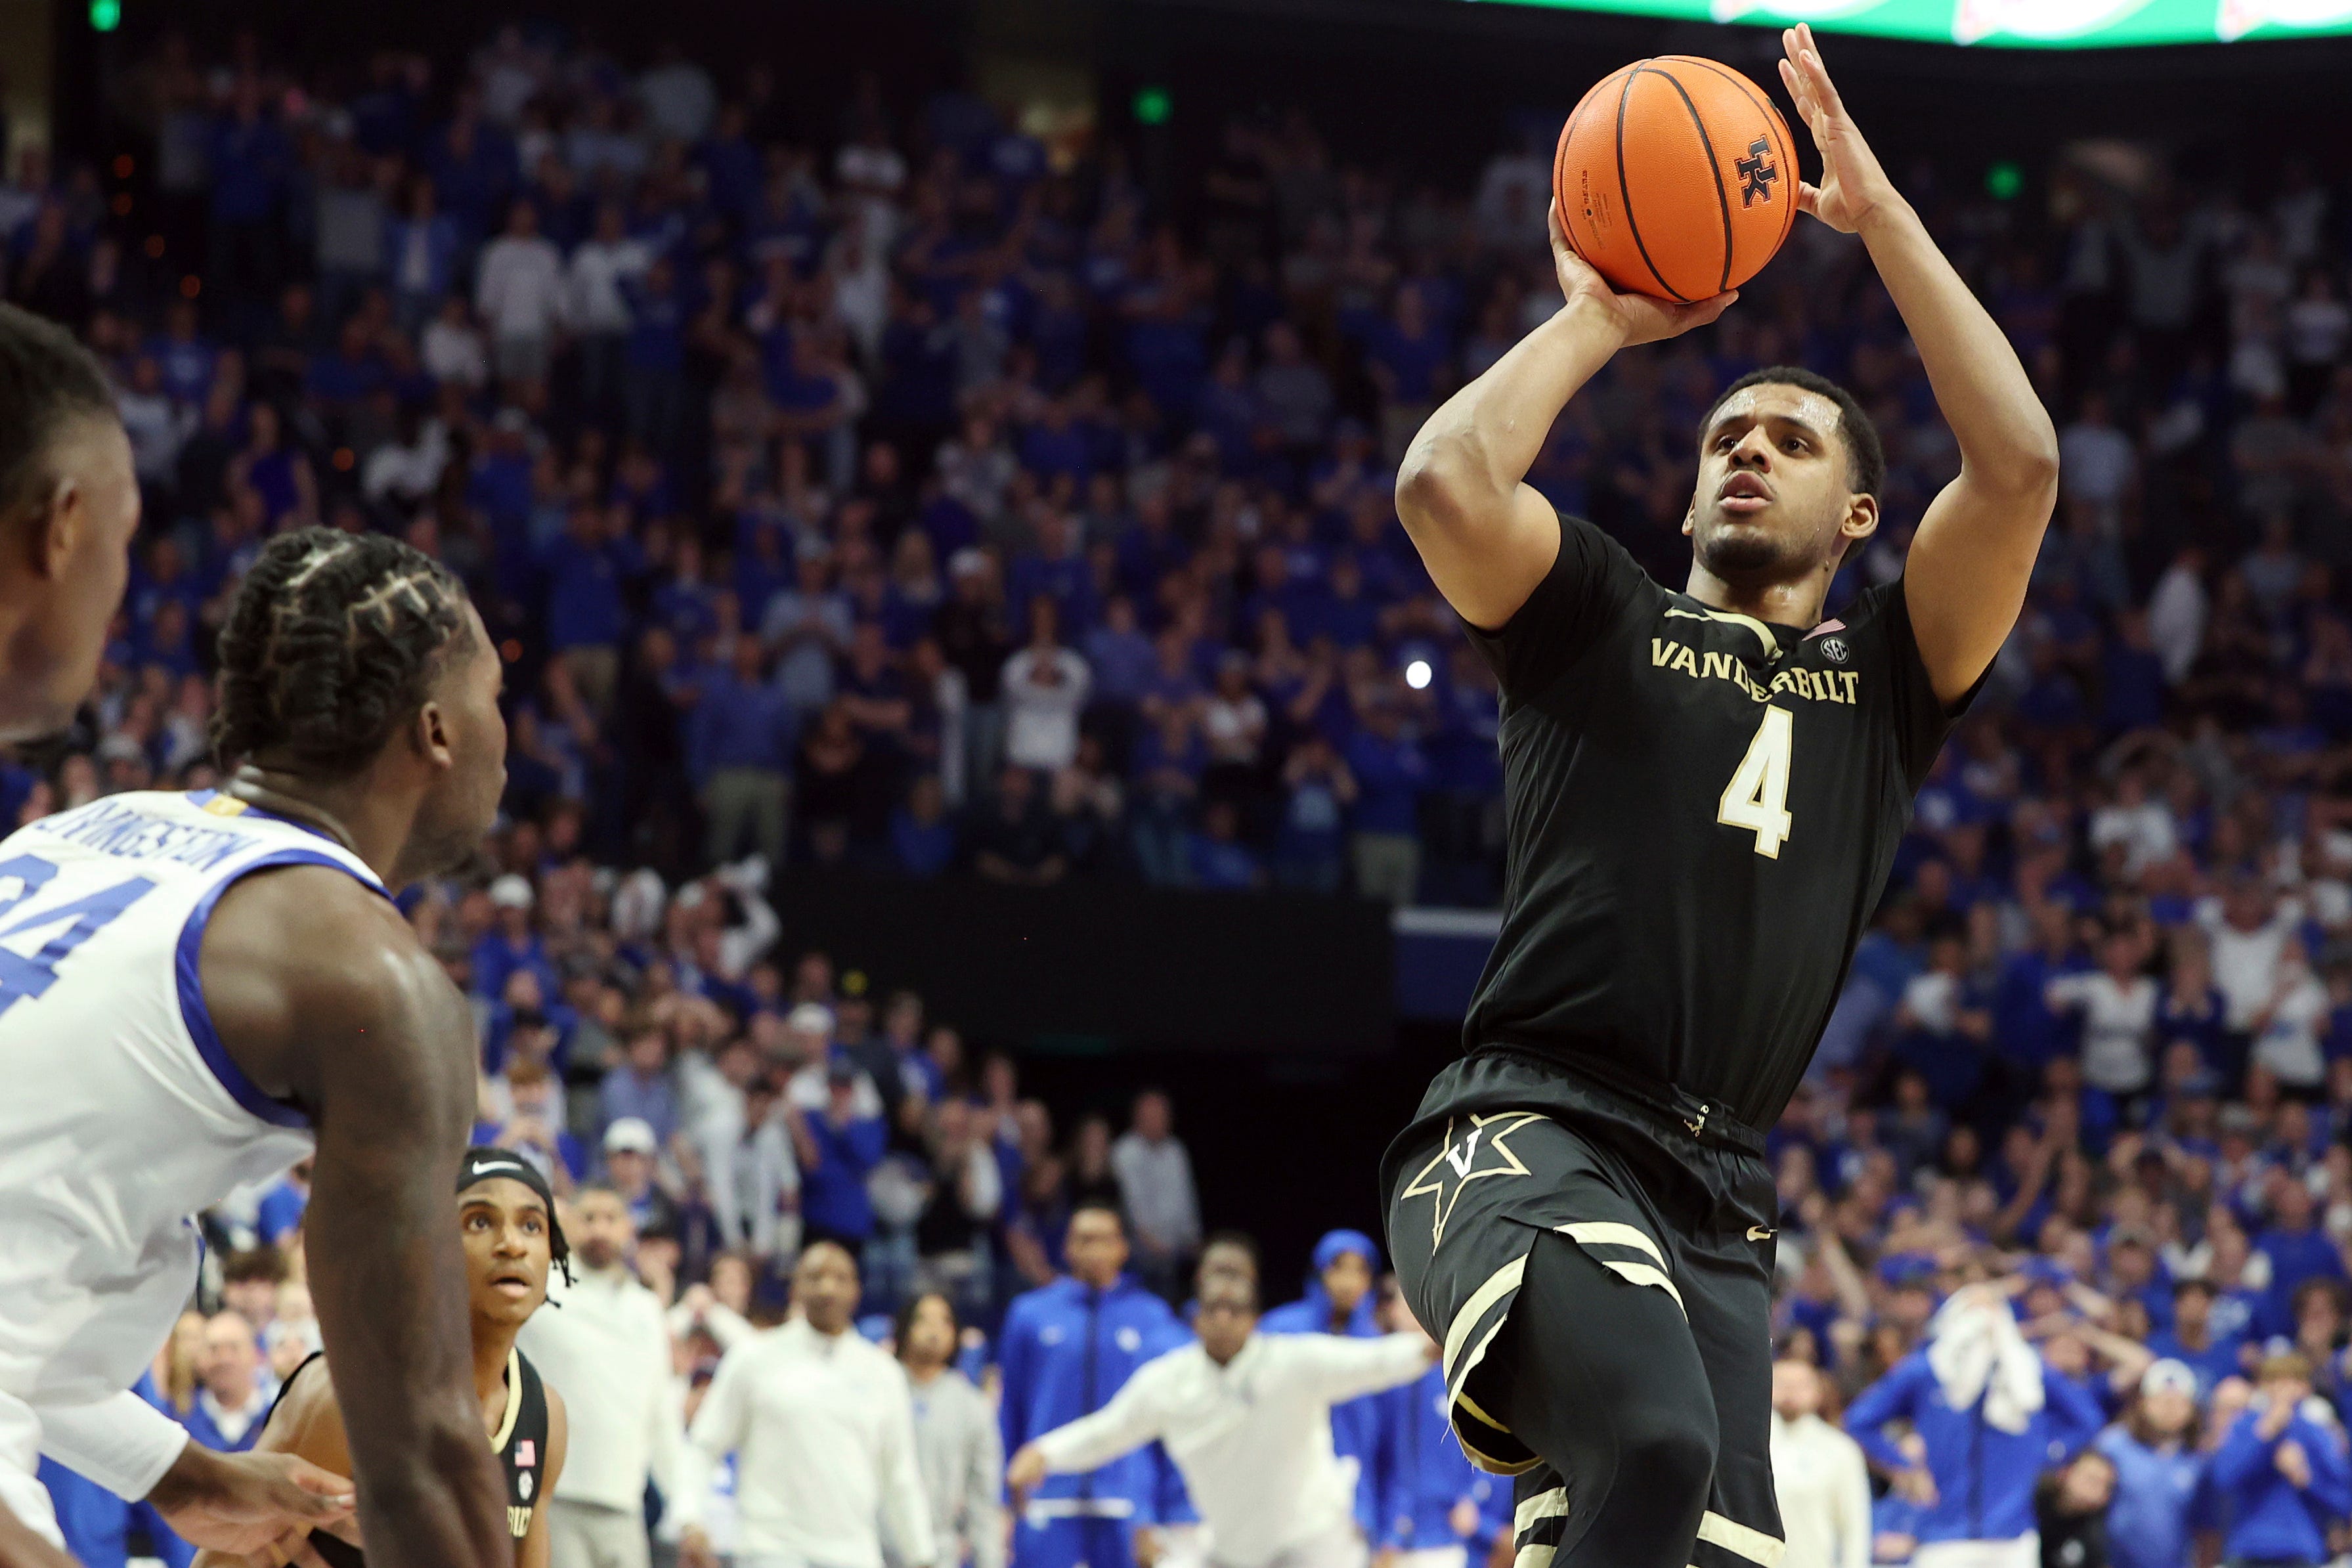 Without Liam Robbins, Vanderbilt basketball rides hot shooting to win over Mississippi State